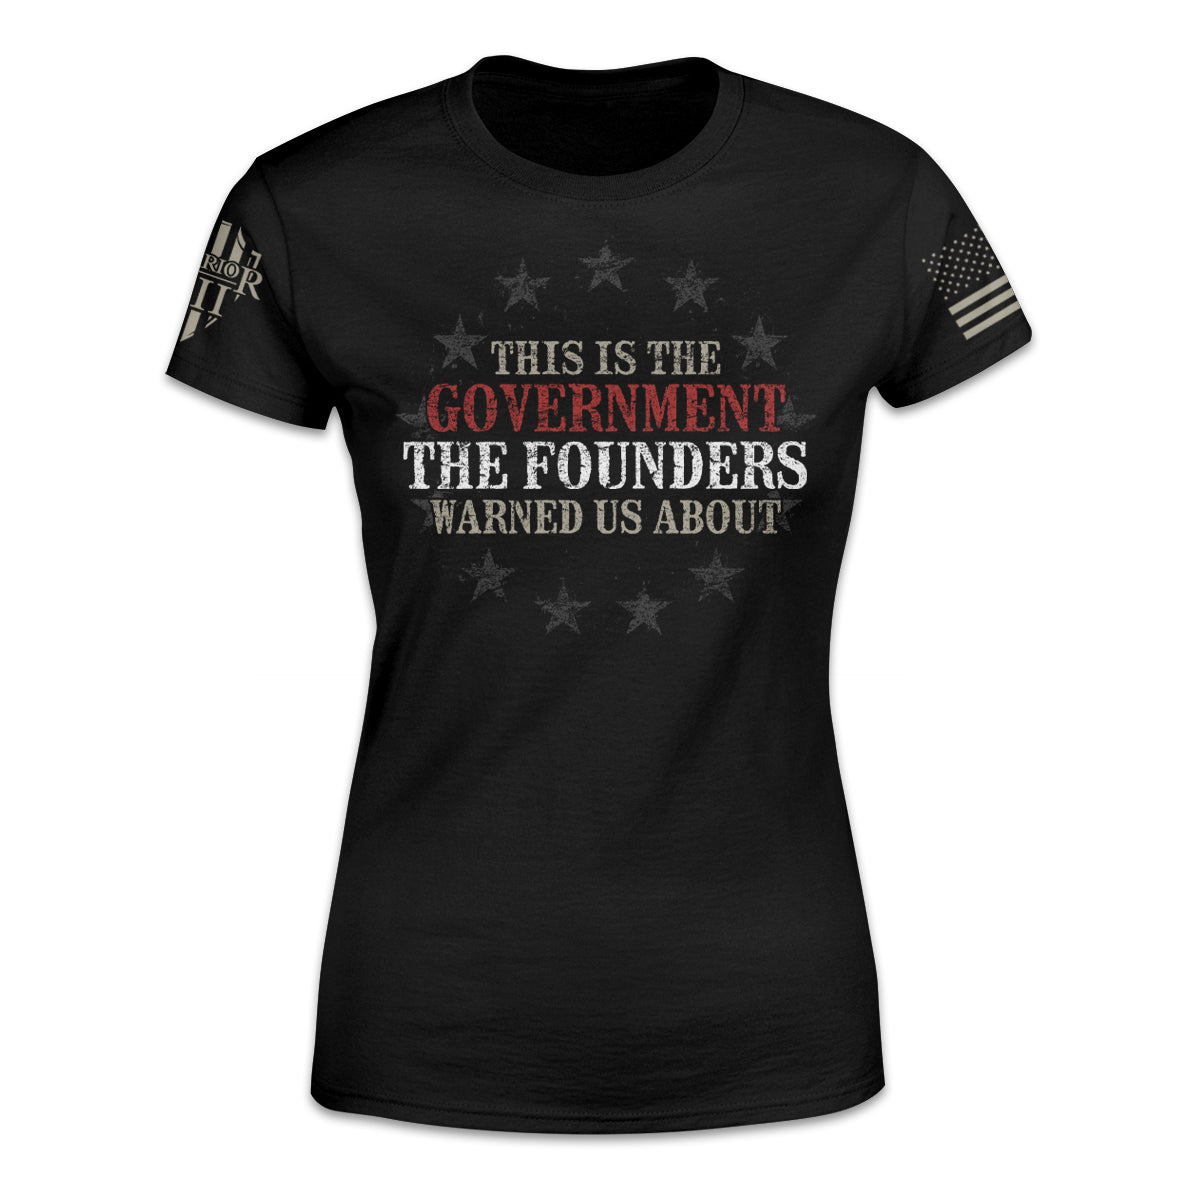 The Founders Warned Us - Women's Relaxed Fit